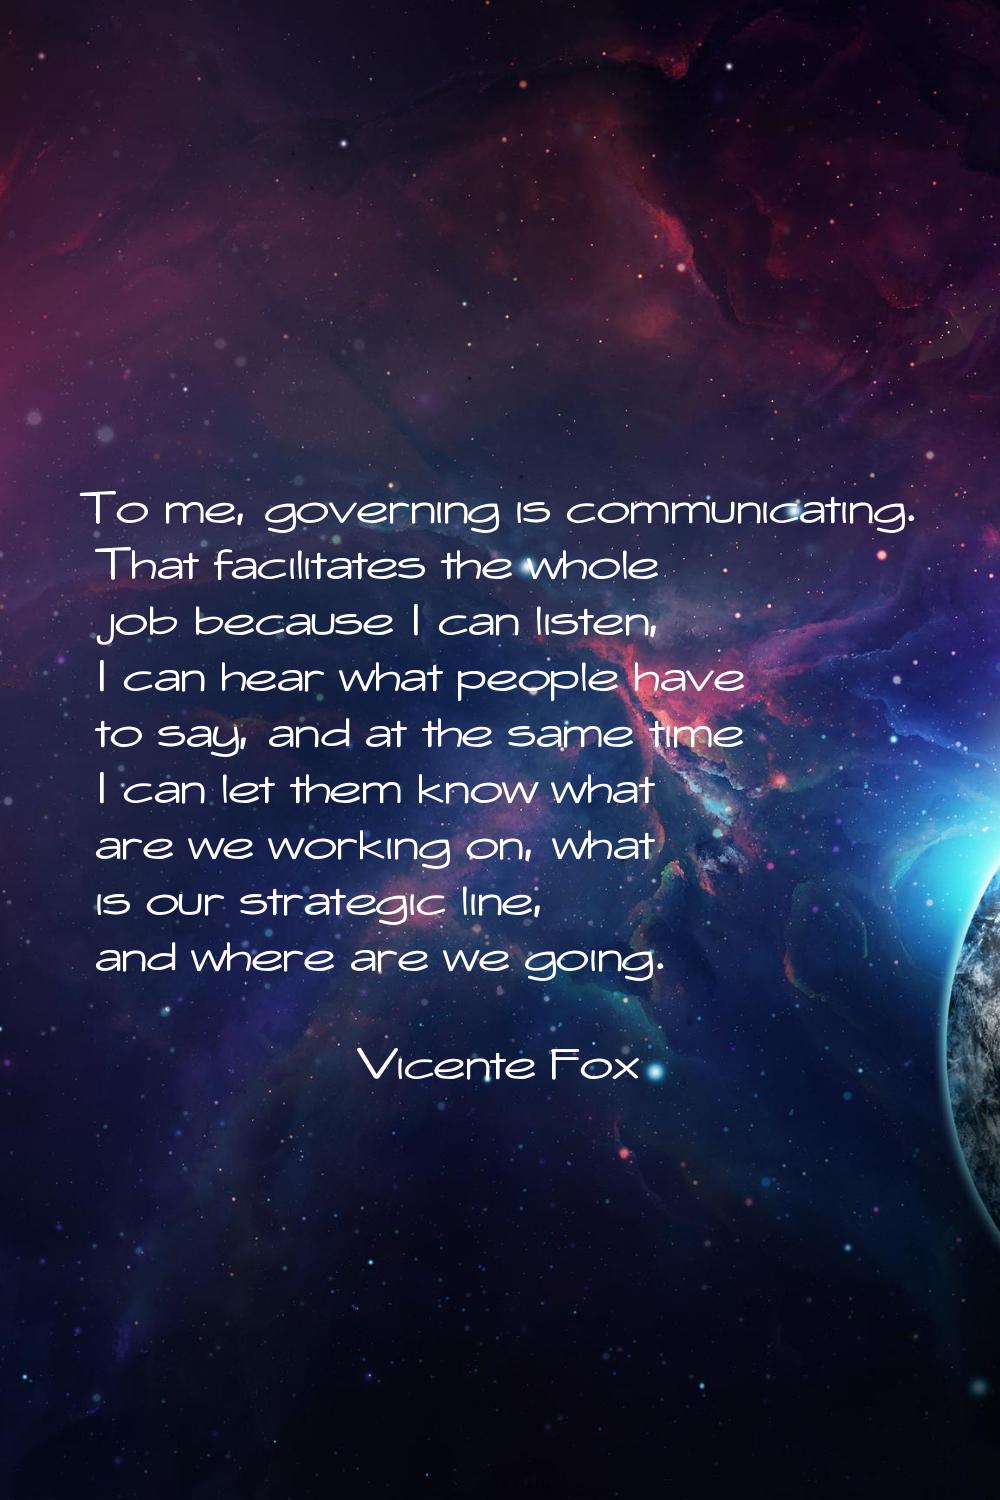 To me, governing is communicating. That facilitates the whole job because I can listen, I can hear 